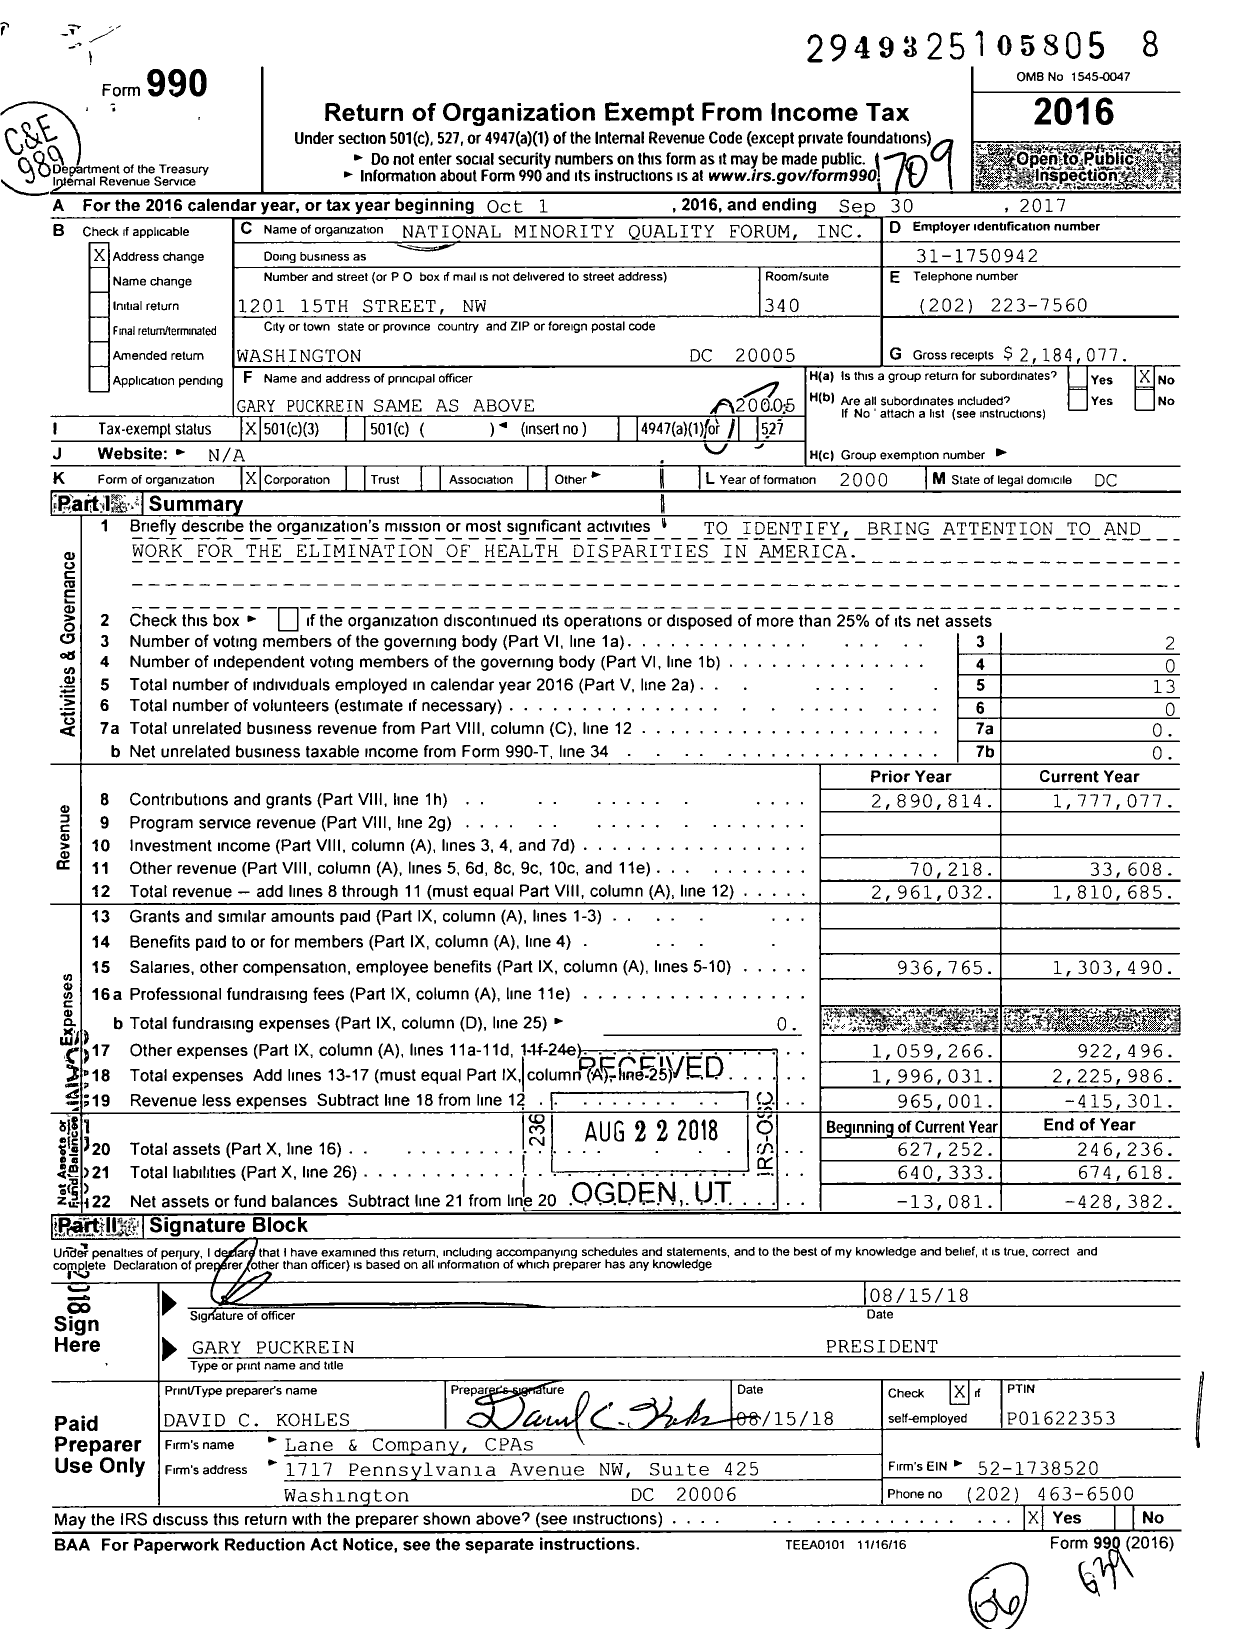 Image of first page of 2016 Form 990 for National Minority Quality Forum